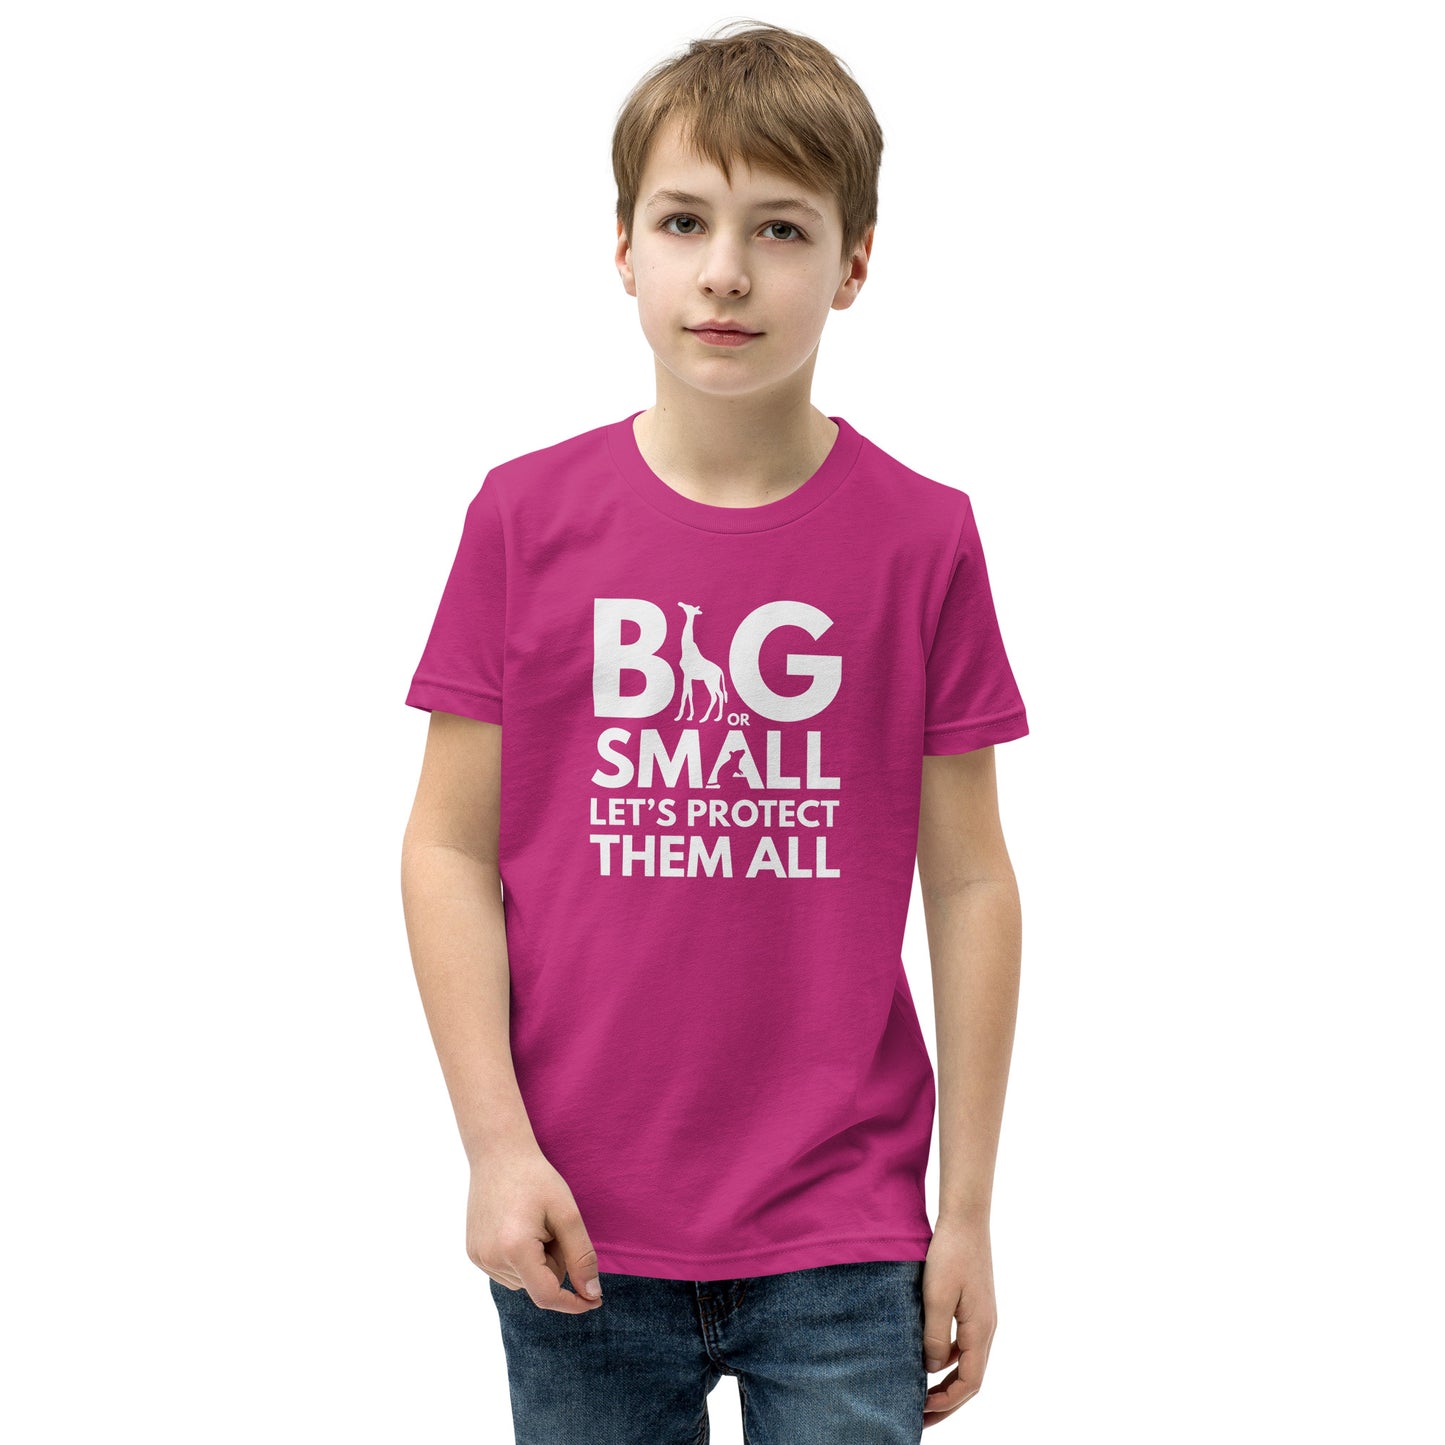 Big Or Small, Let's Protect Them All - Youth Short Sleeve T-Shirt